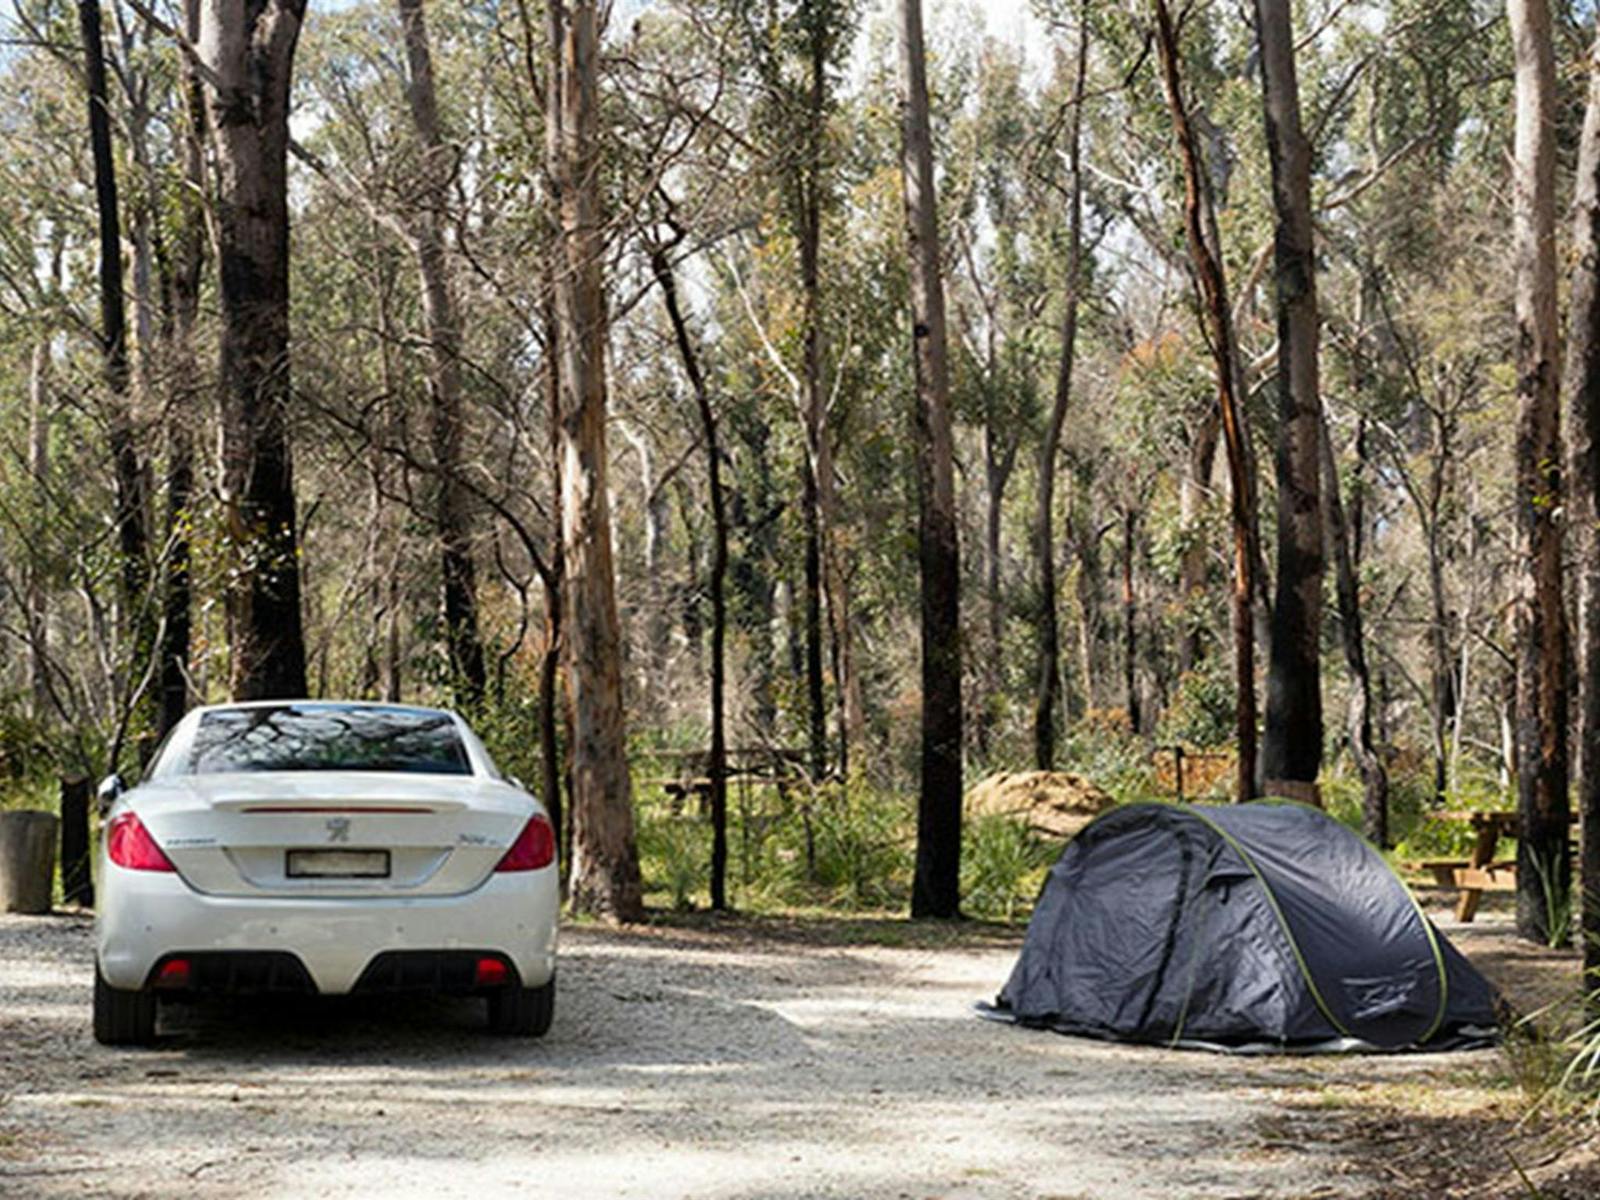 A car parked next to a pitched tent with bush in the background at Bald Rock campground and picnic